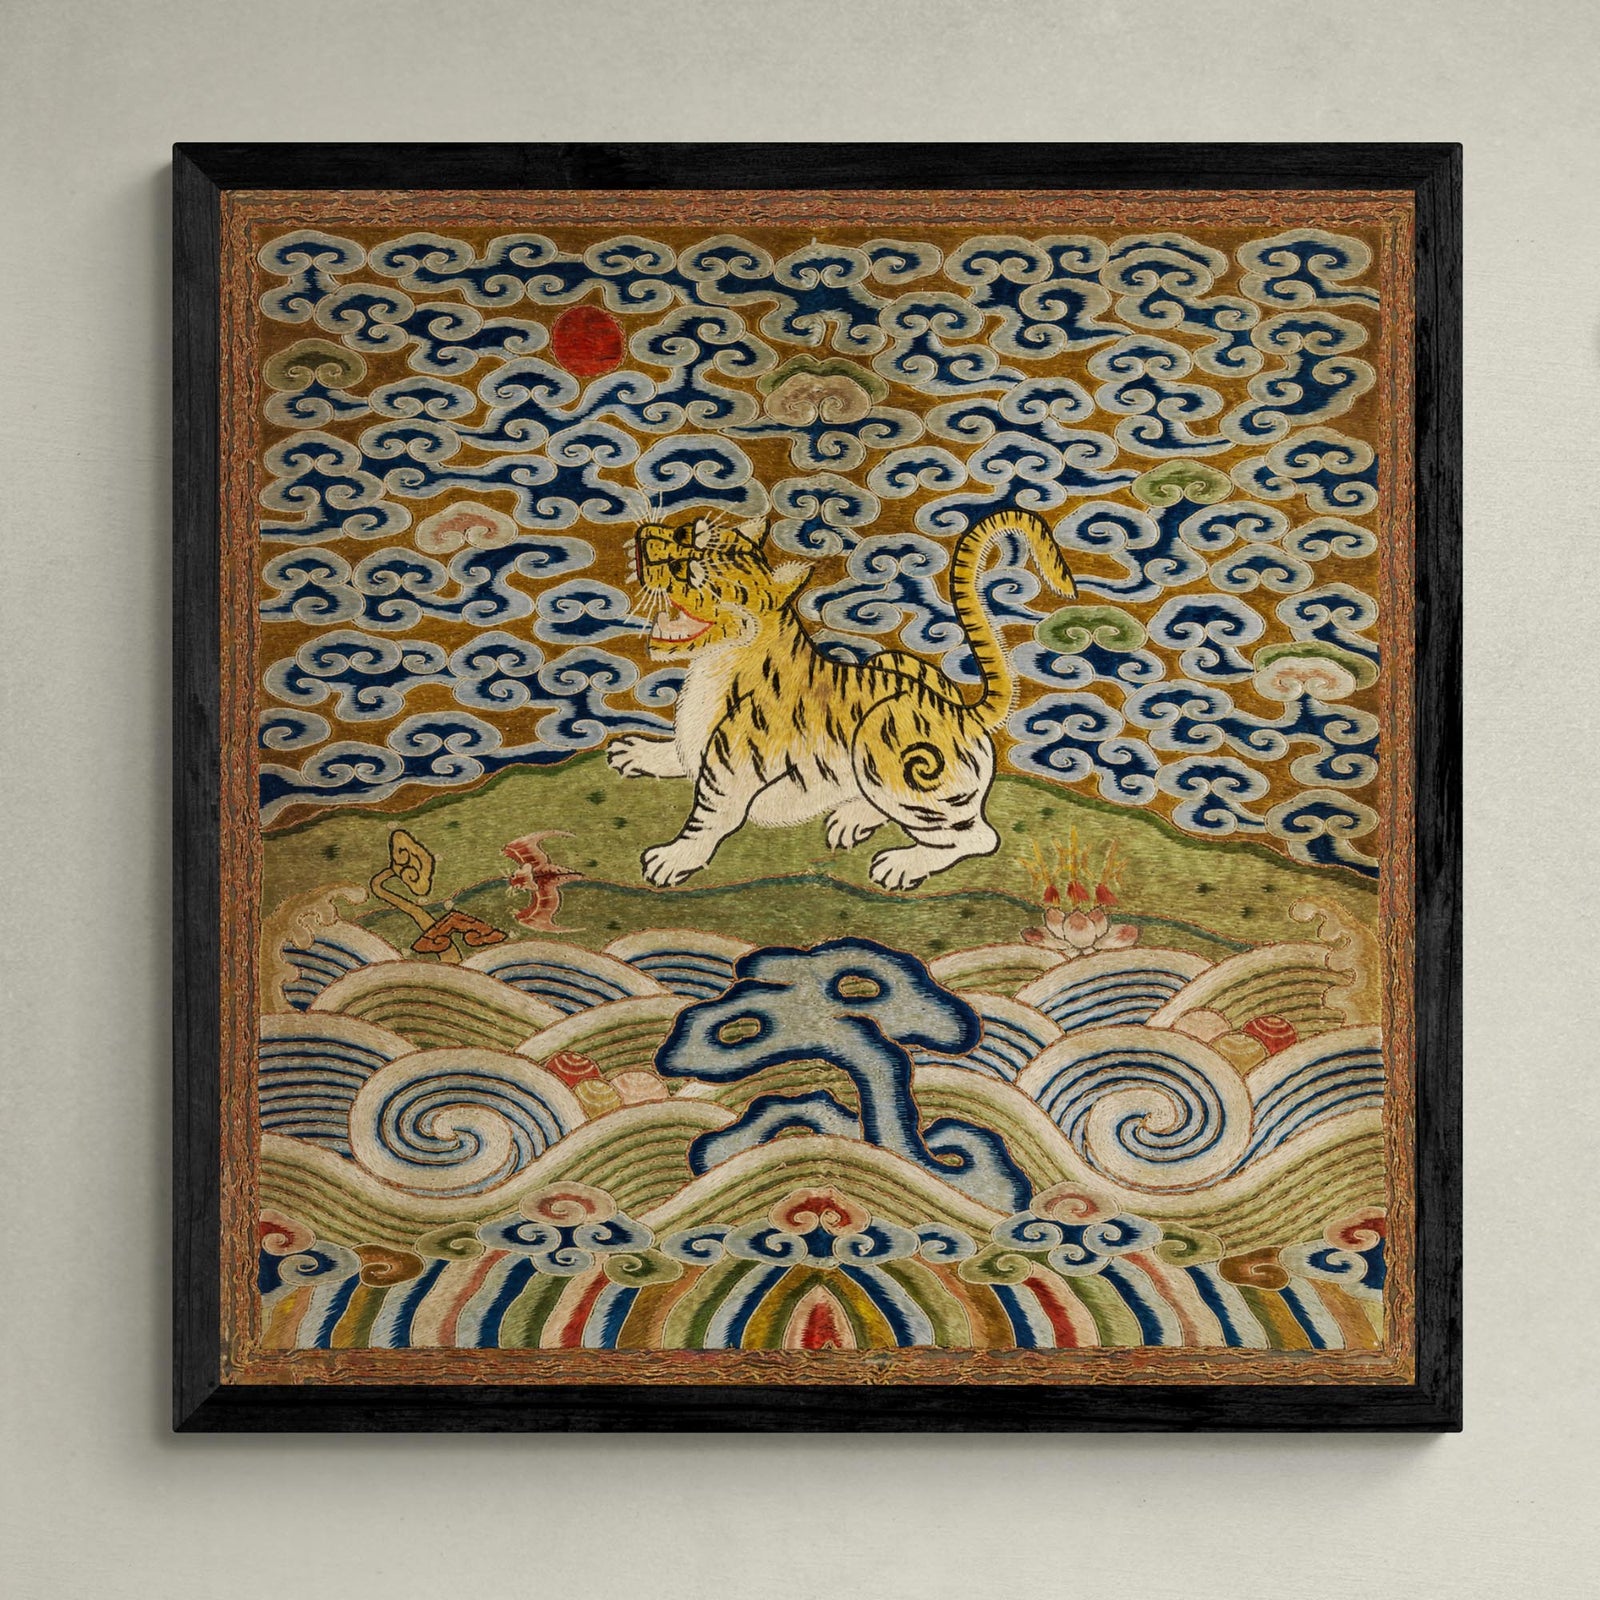 Fine art Qing Dynasty, Chinese Silk Embroidery | Leopard Lion Cat Lover Panther Mandarin Square Thangka | Vintage Fine Art Print